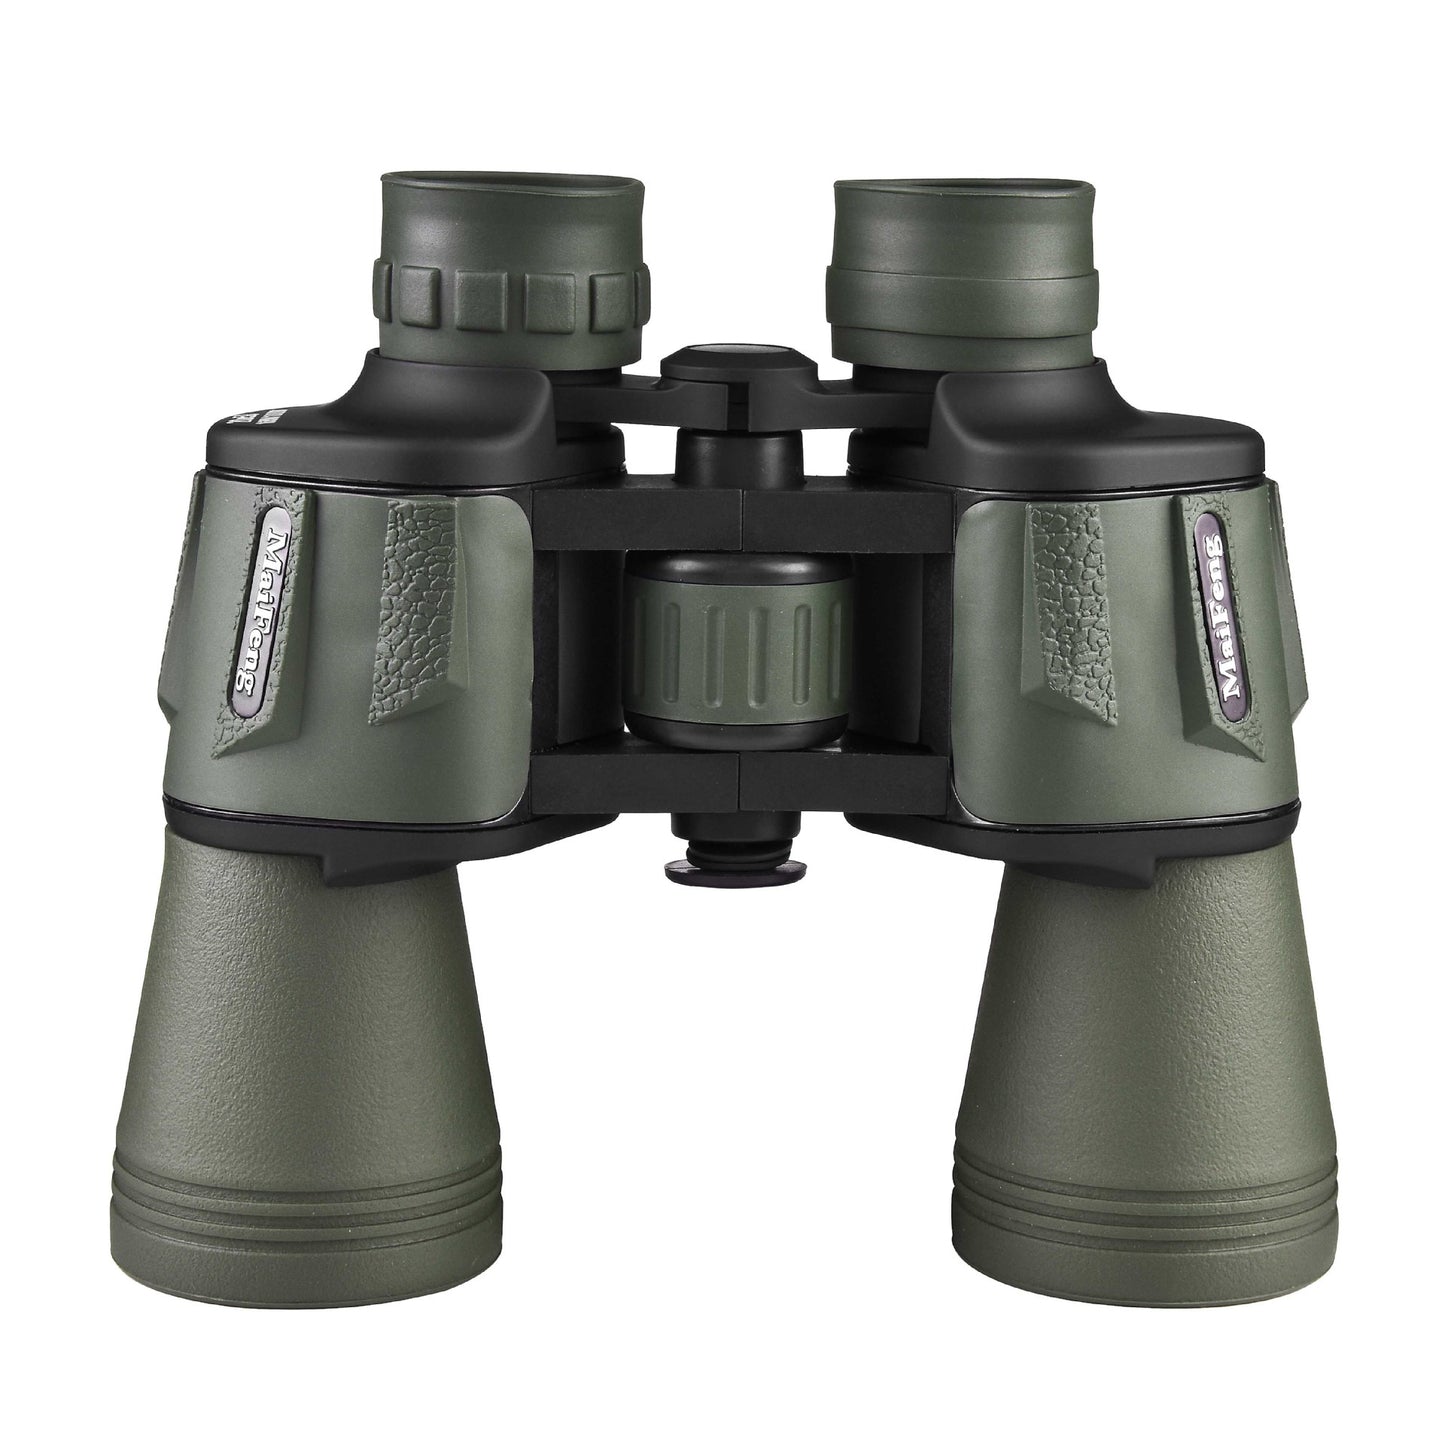 Special Forces Night Vision Non-Infrared Binoculars